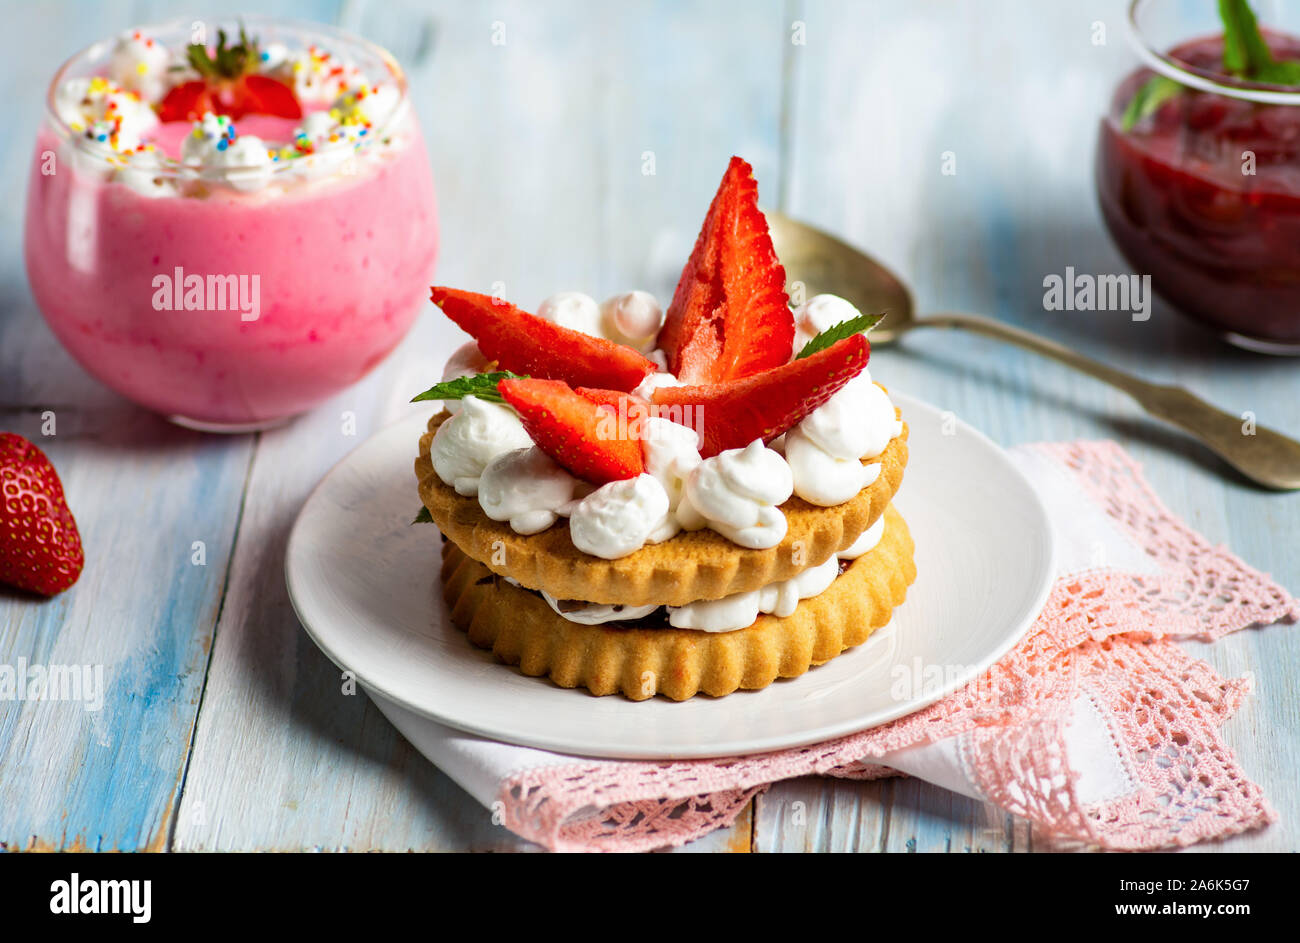 Homemade strawberry dessert with sweet cream in a cup Stock Photo